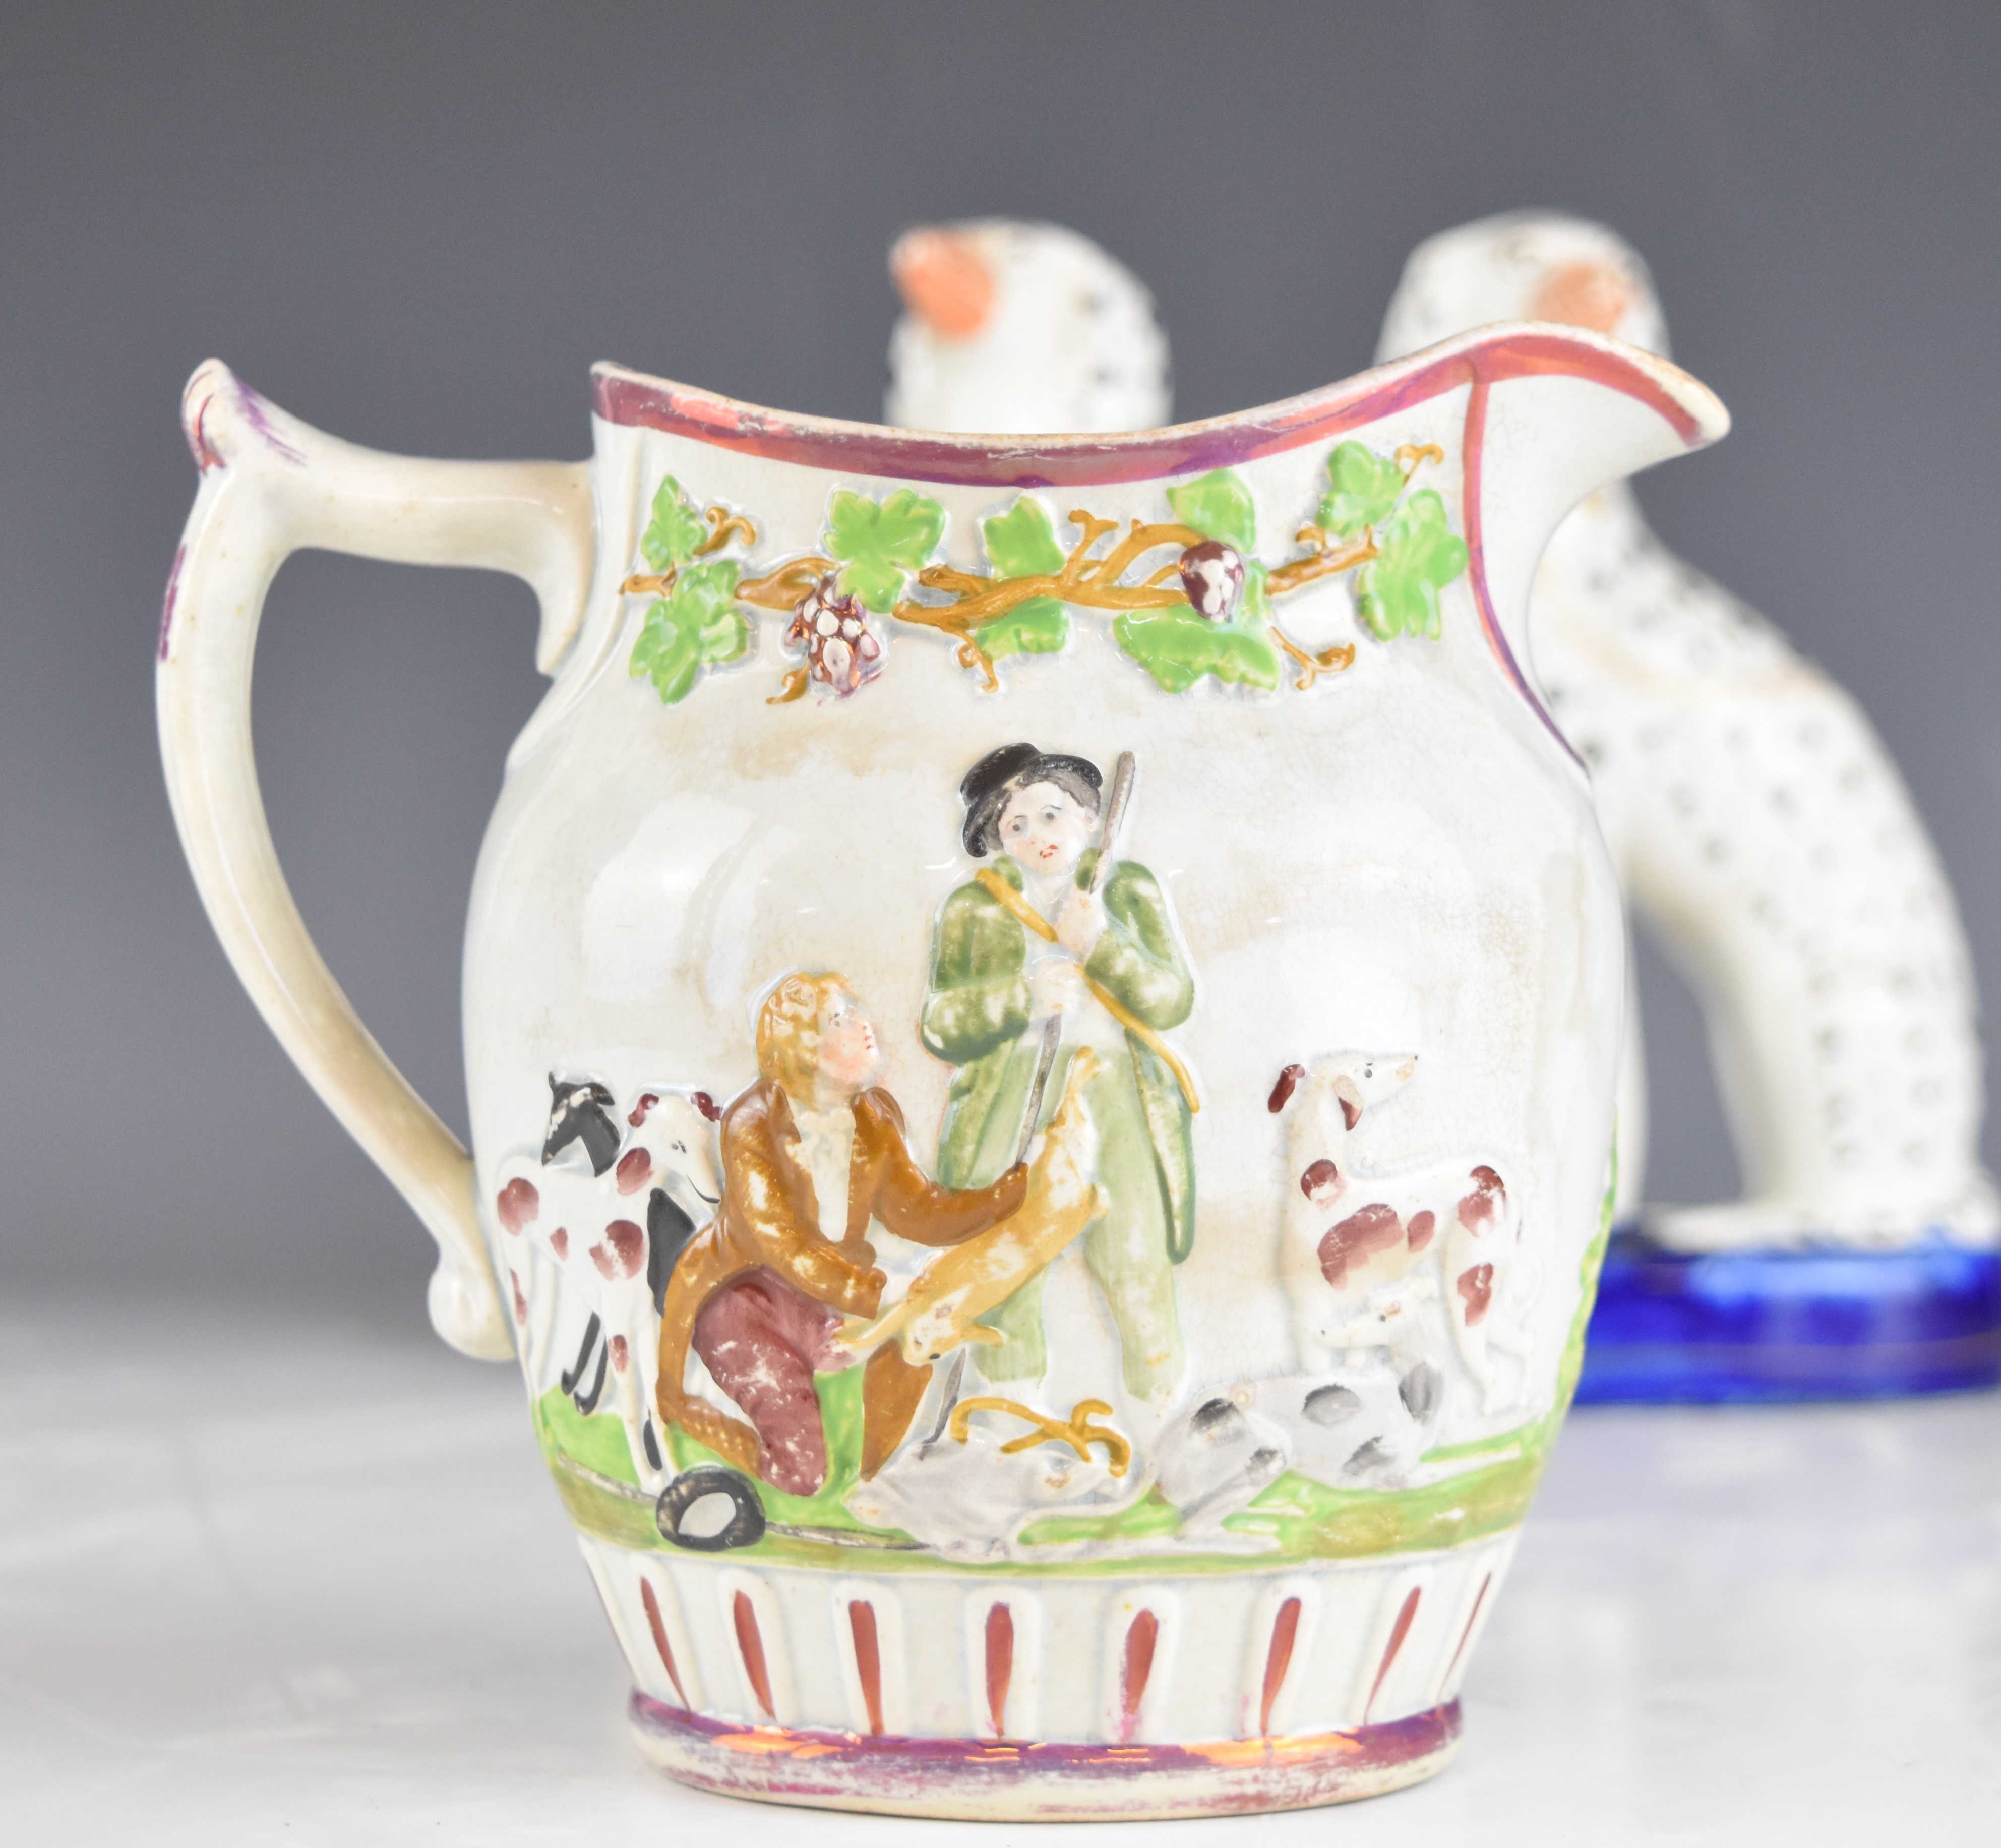 Pirkenhammer porcelain silhouette coffee ware, Herend, Spode and Staffordshire ware etc, tallest - Image 9 of 10